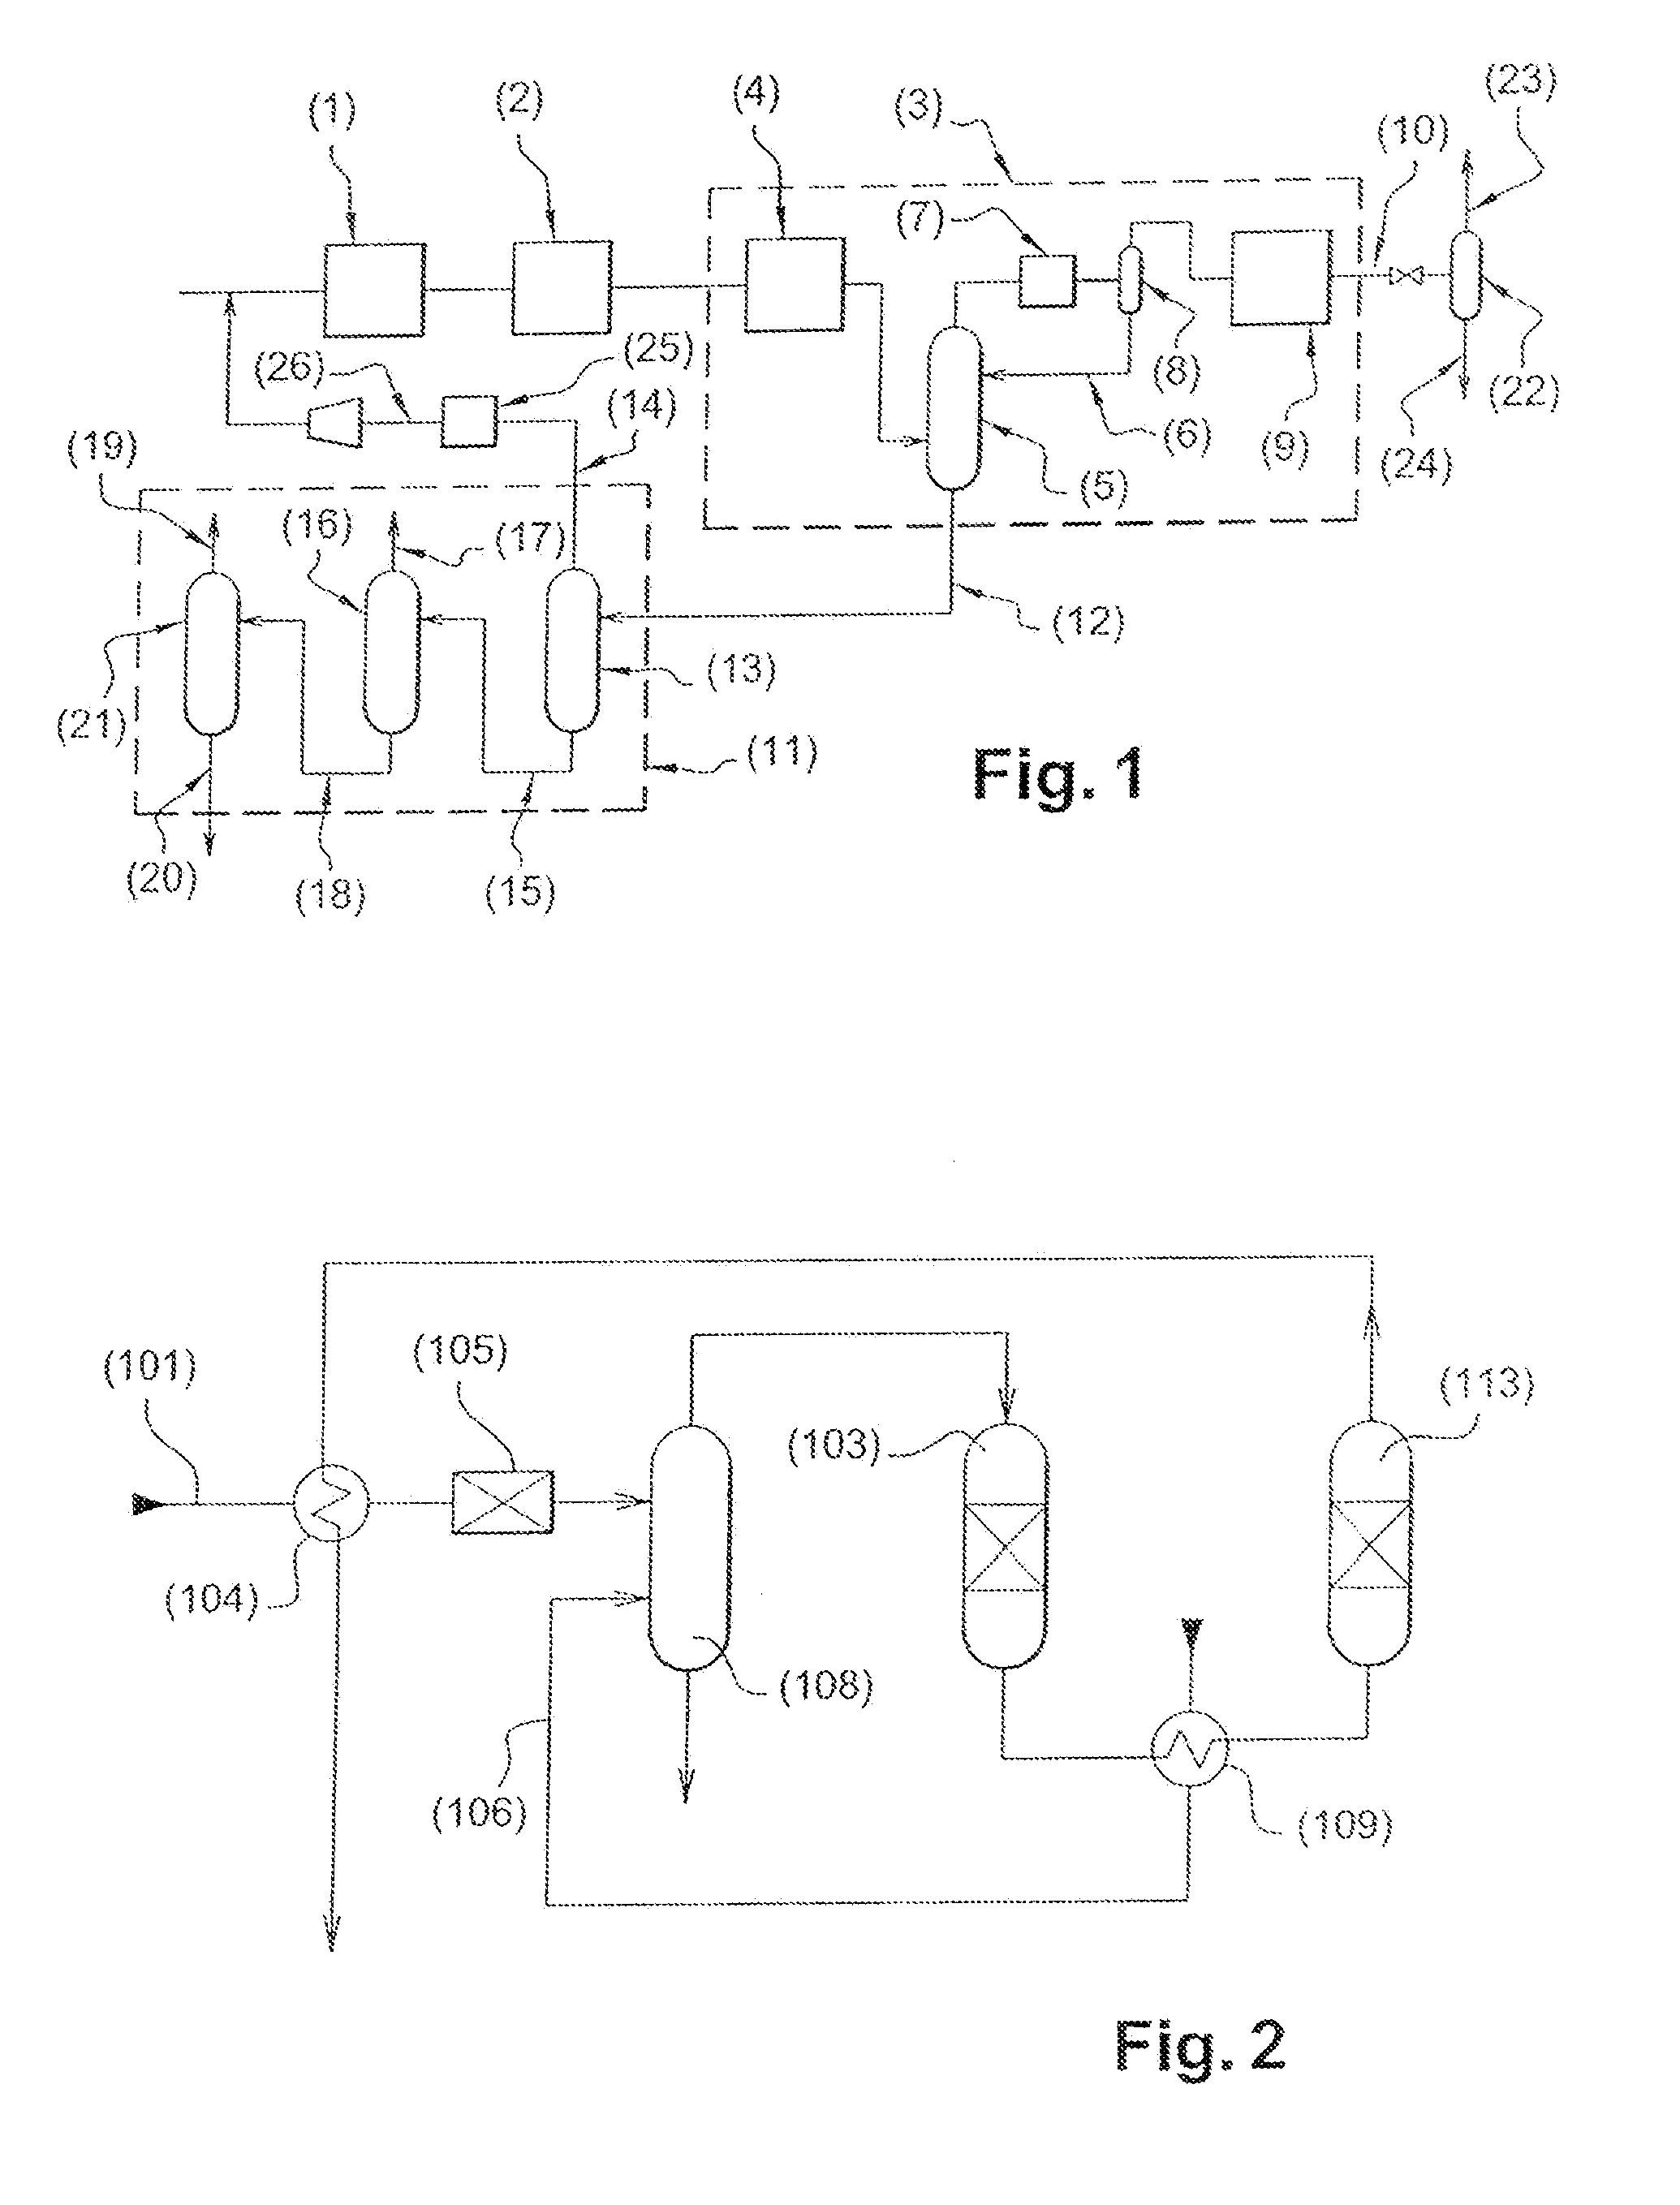 Method for adjusting the high heating value of gas in the LNG chain